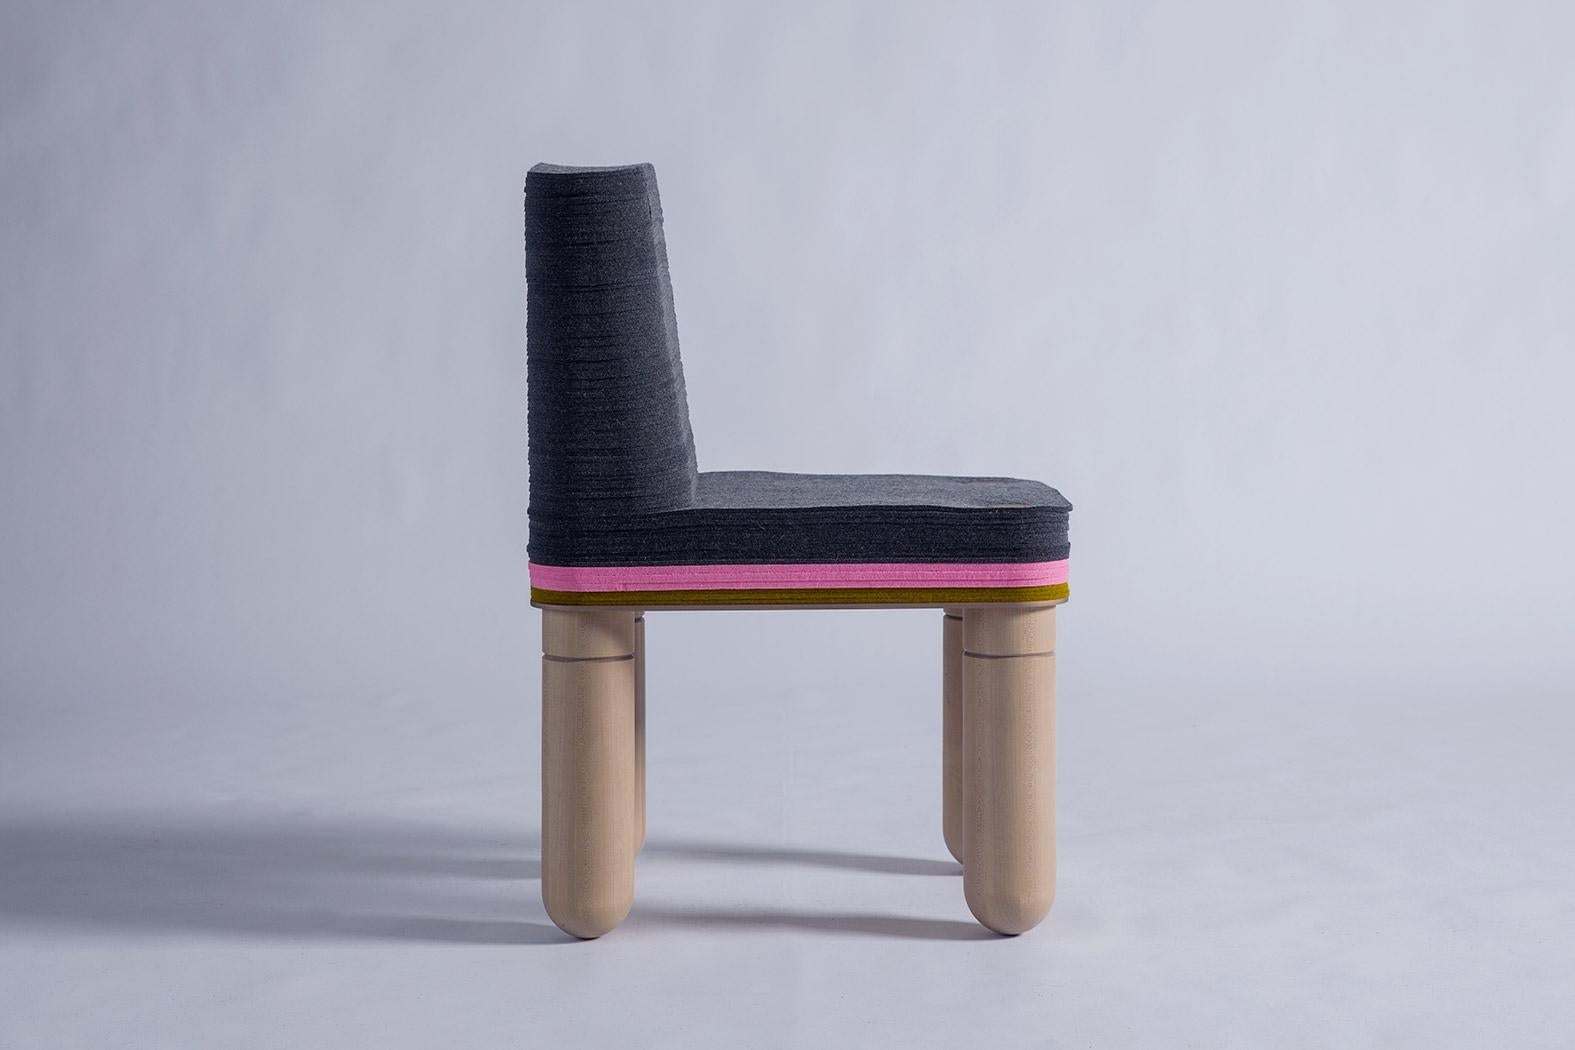 Contemporary Dulces B, Felt and Wood Dine Chair, Laura Kirar in Stackabl, Canada, 2021 For Sale